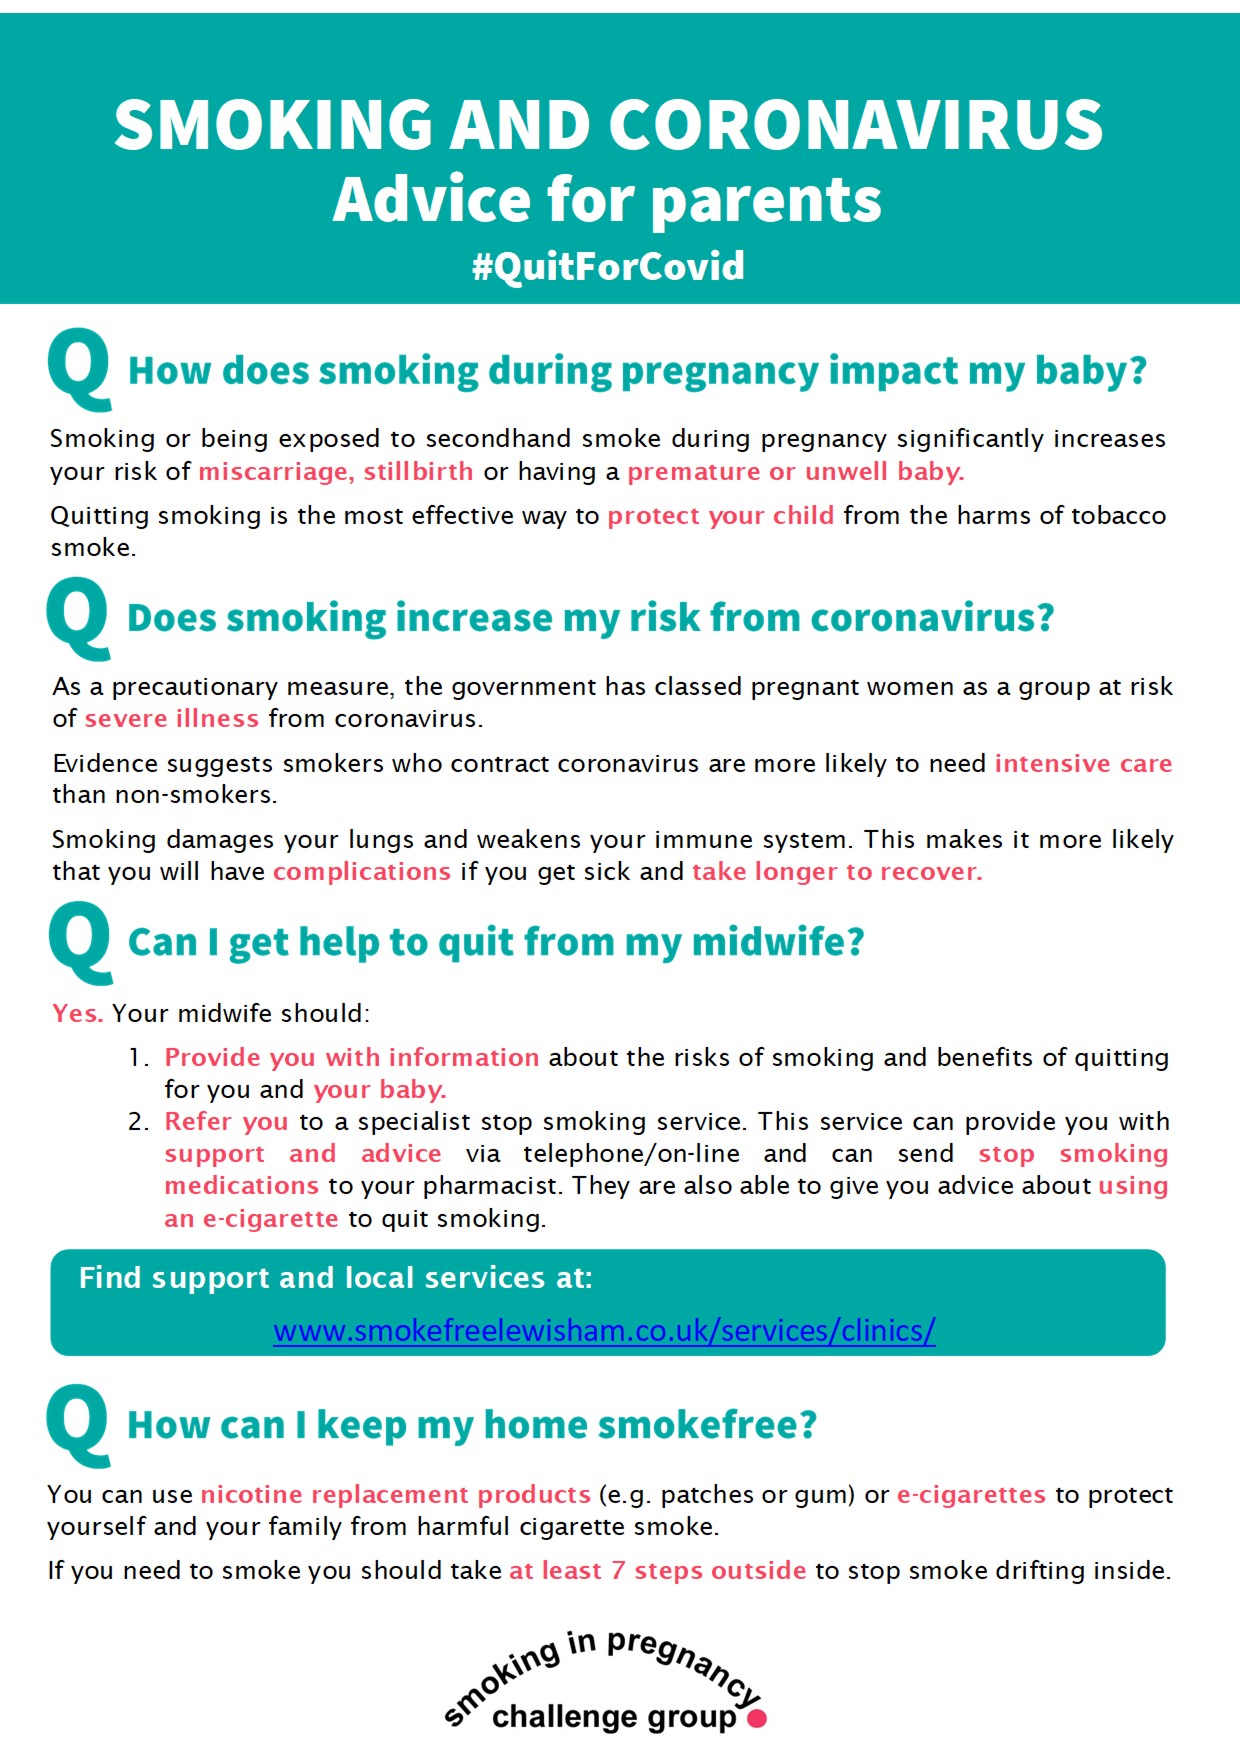 Guide for Pregnant Smokers during Coronavirus